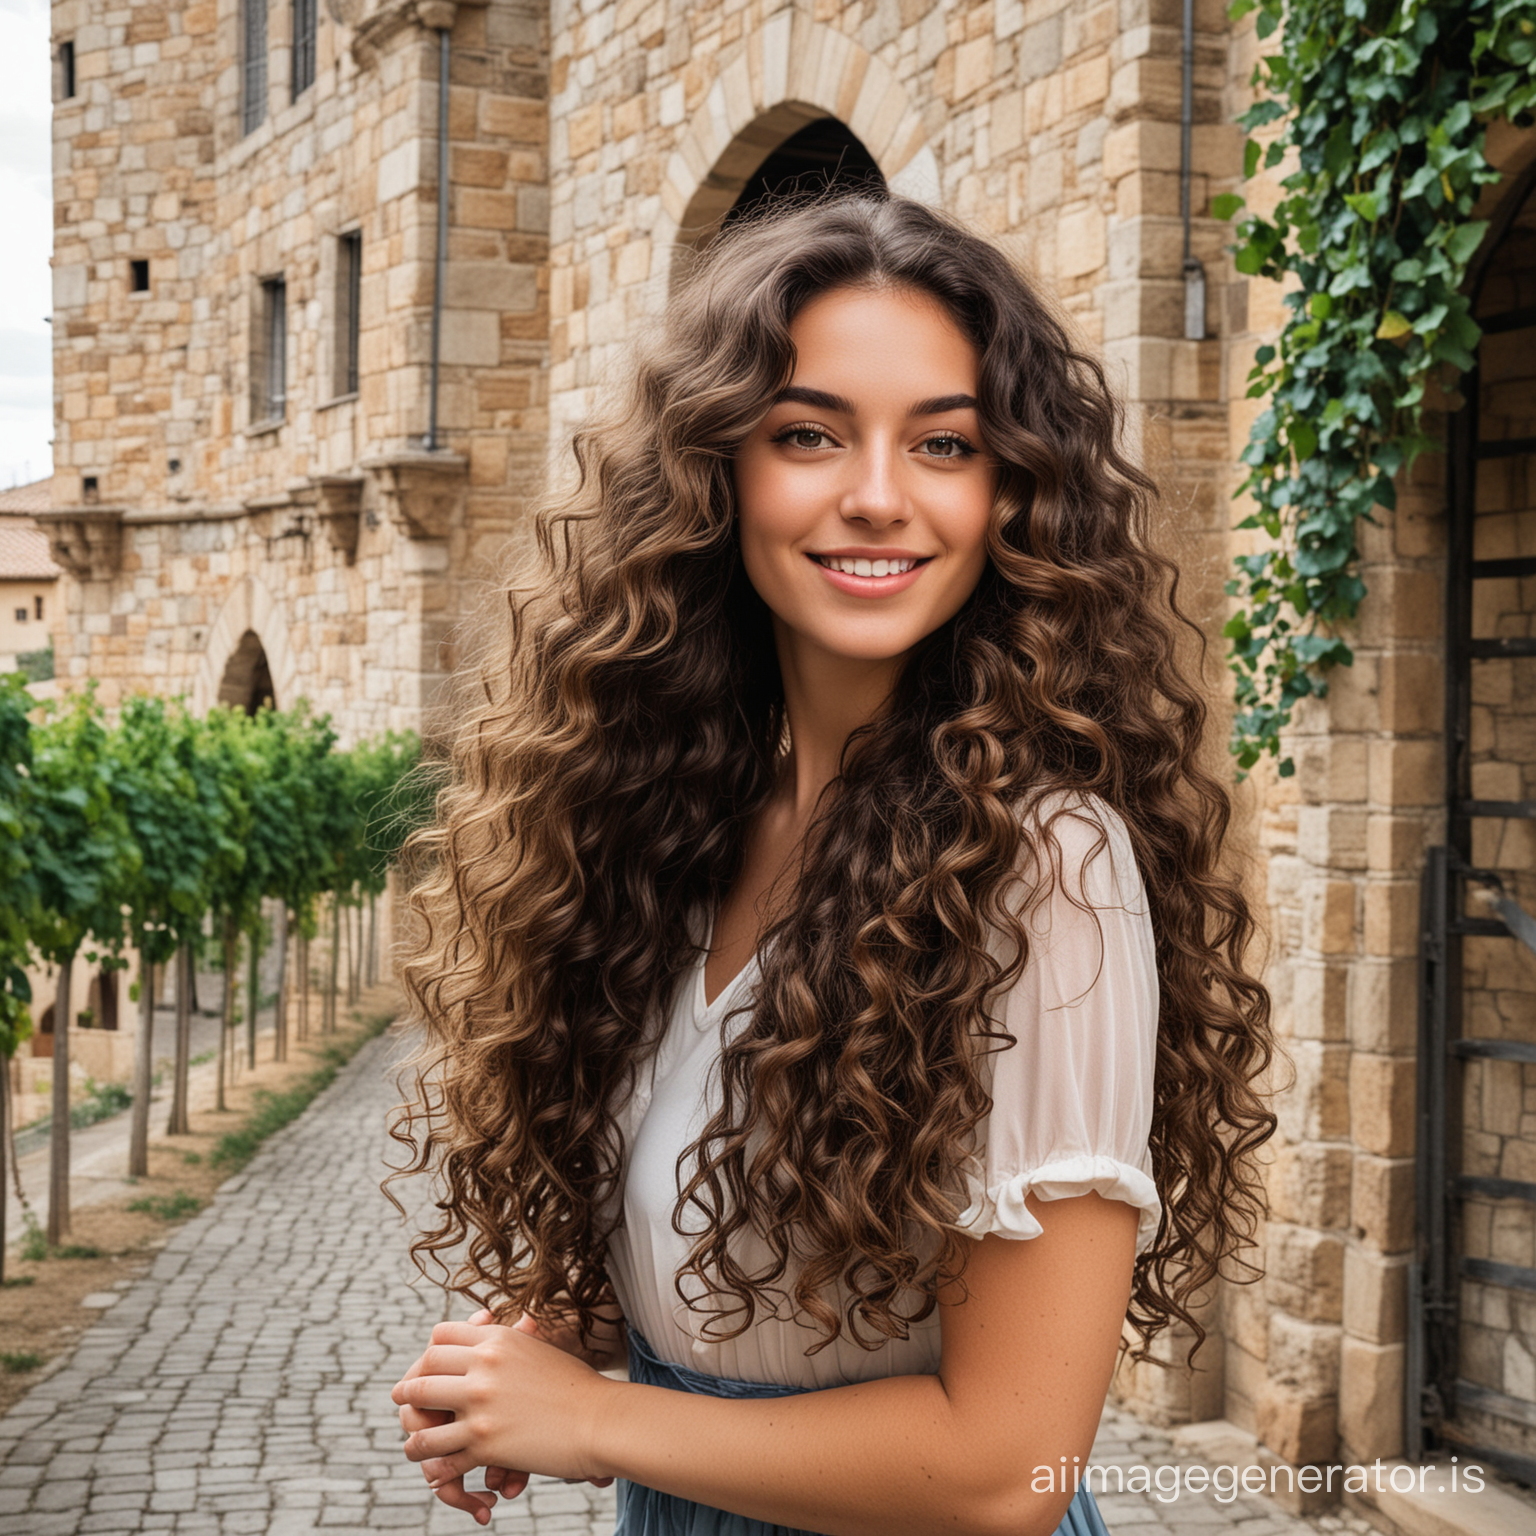 Girl with long curly hair in aesthetic luxury castle winery